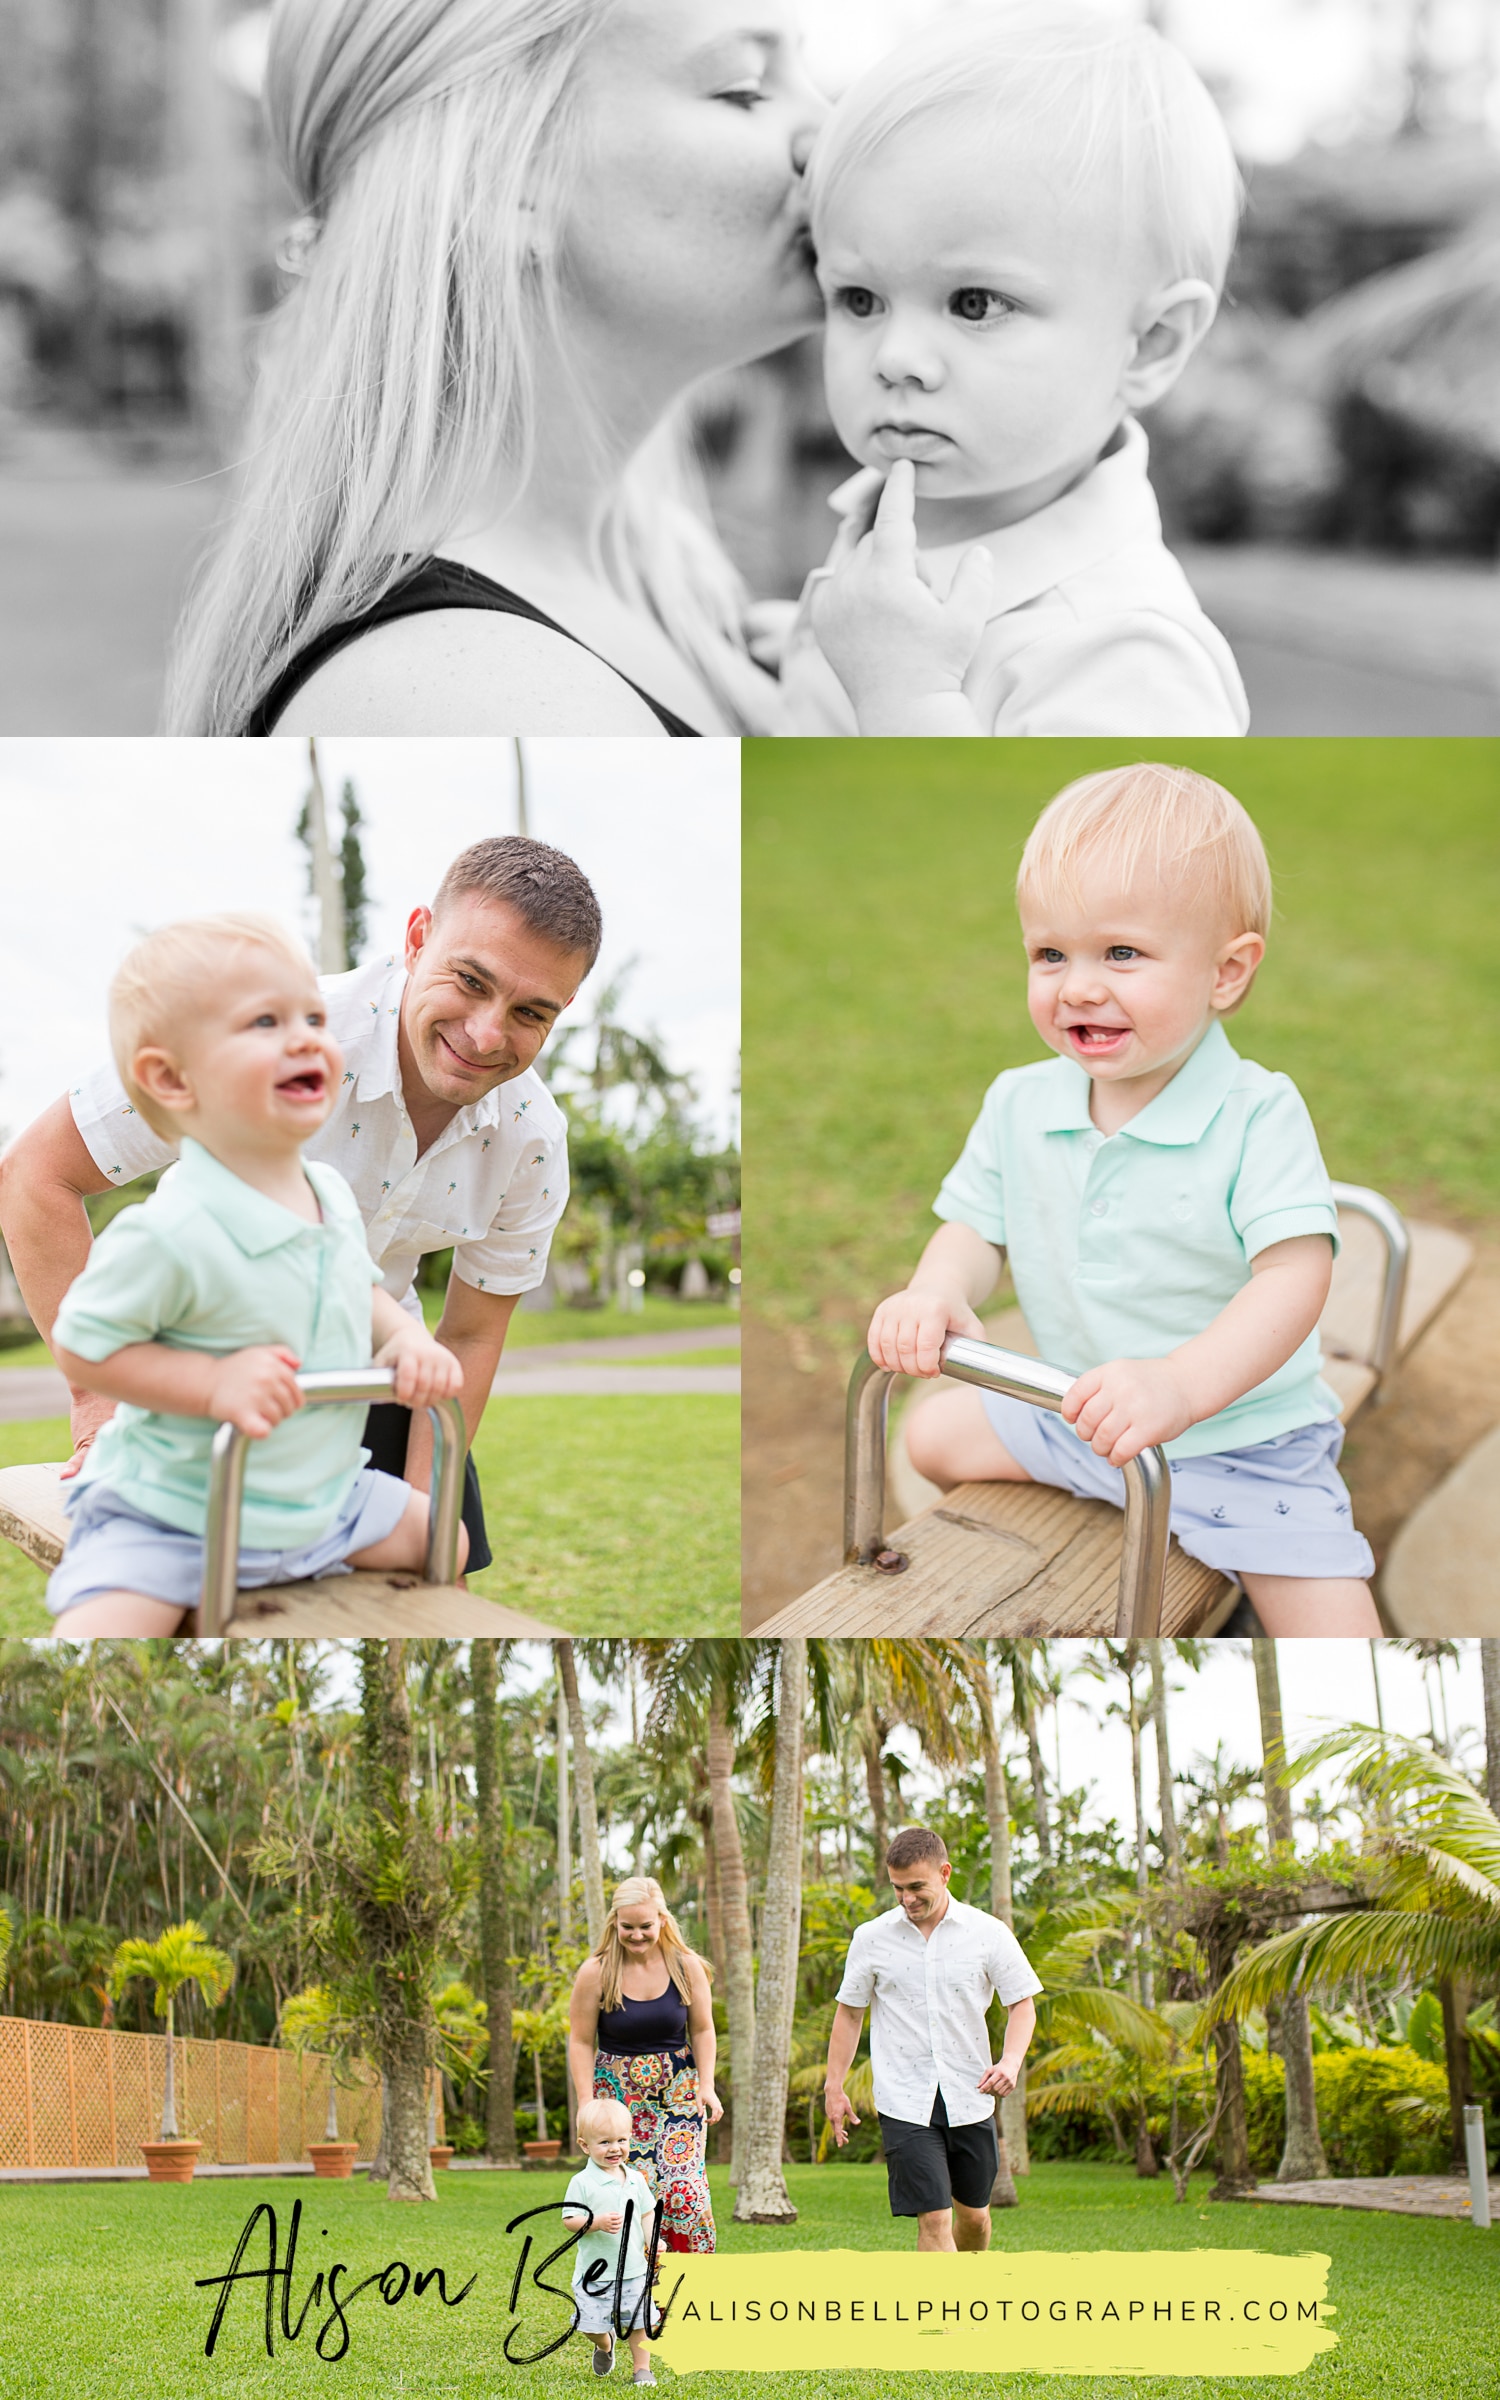 Family of four photo session at Okinawa's Southeast Botanical Gardens by Alison Bell, Photographer